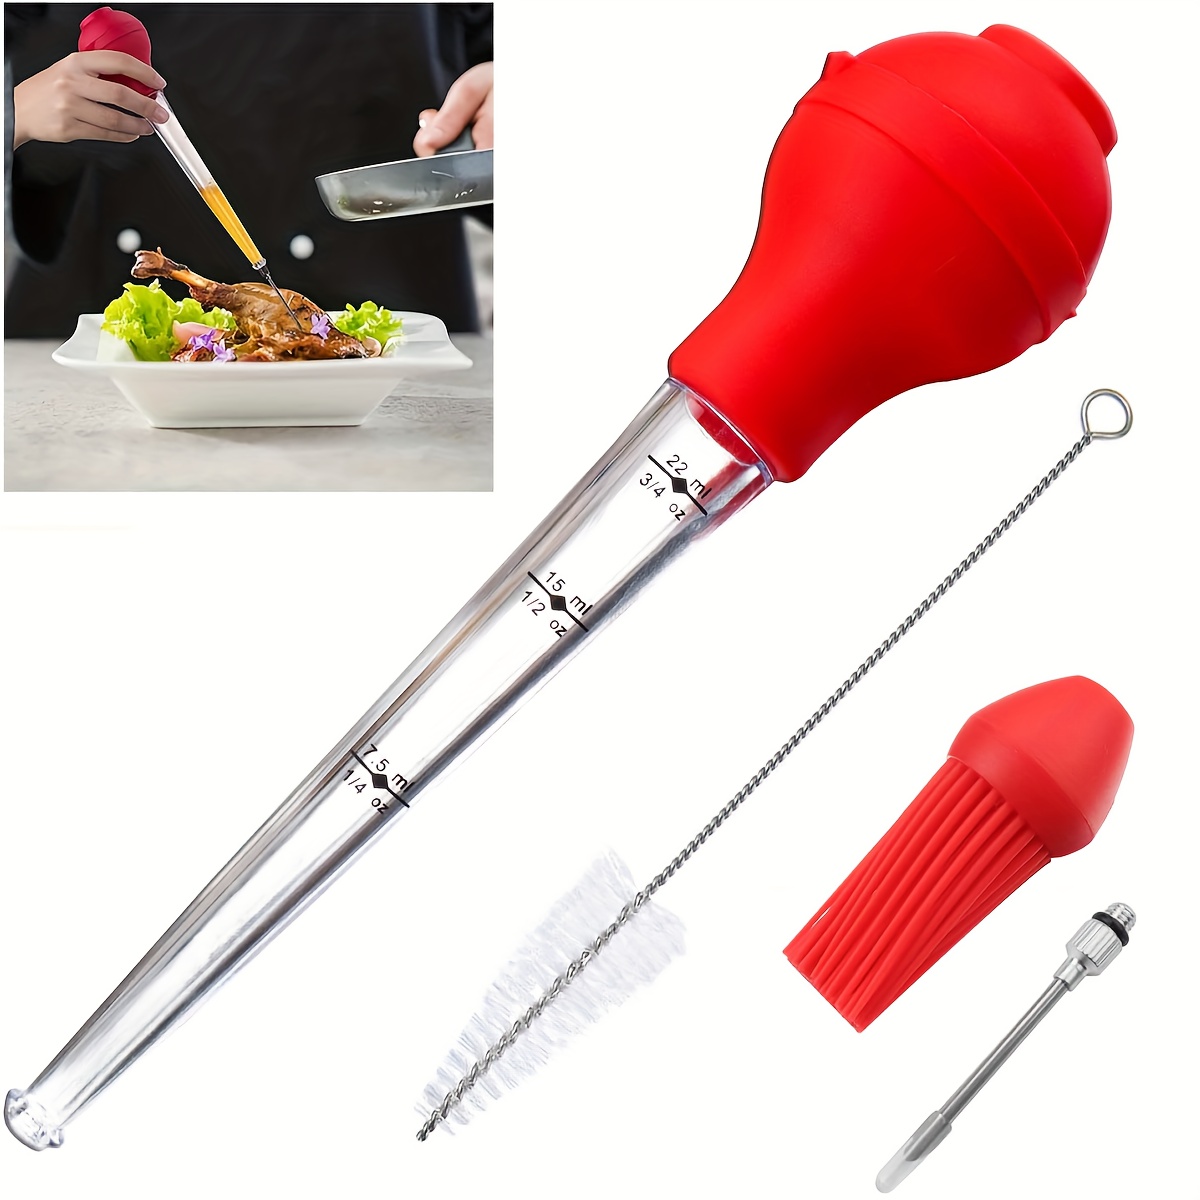 Stainless Steel Turkey Baster Baster Syringe for Cooking Meat